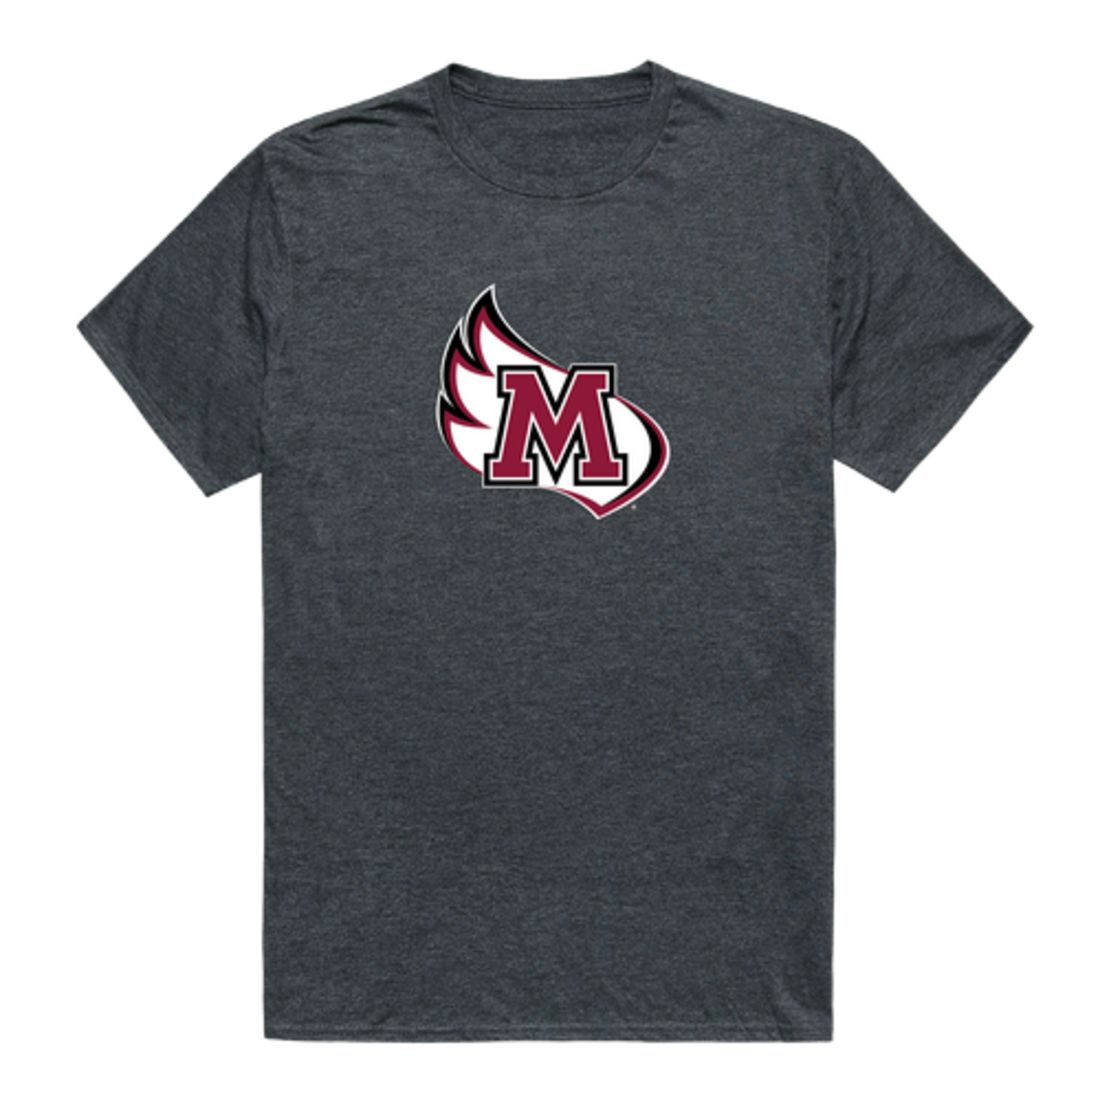 Meredith College Avenging Angels Cinder T-Shirt Tee